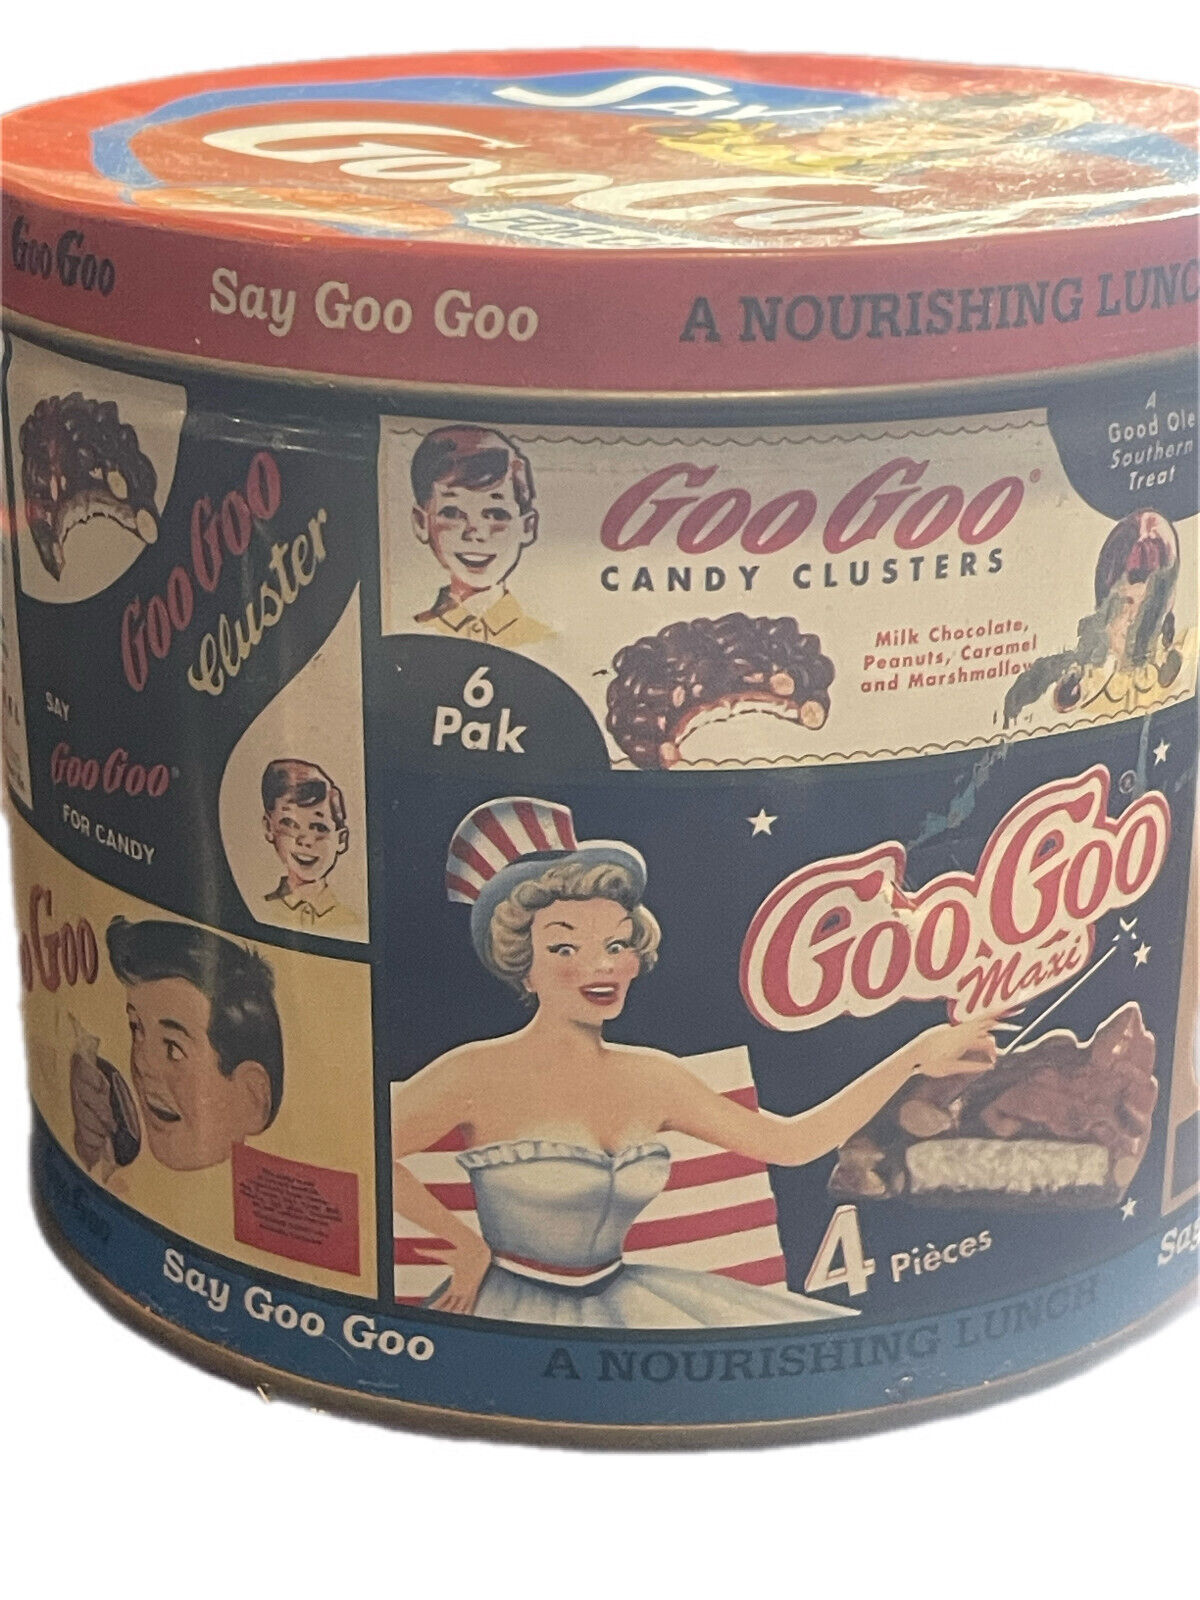 Vintage Say Goo Goo Candy Clusters A Nourishing Lunch Can Container